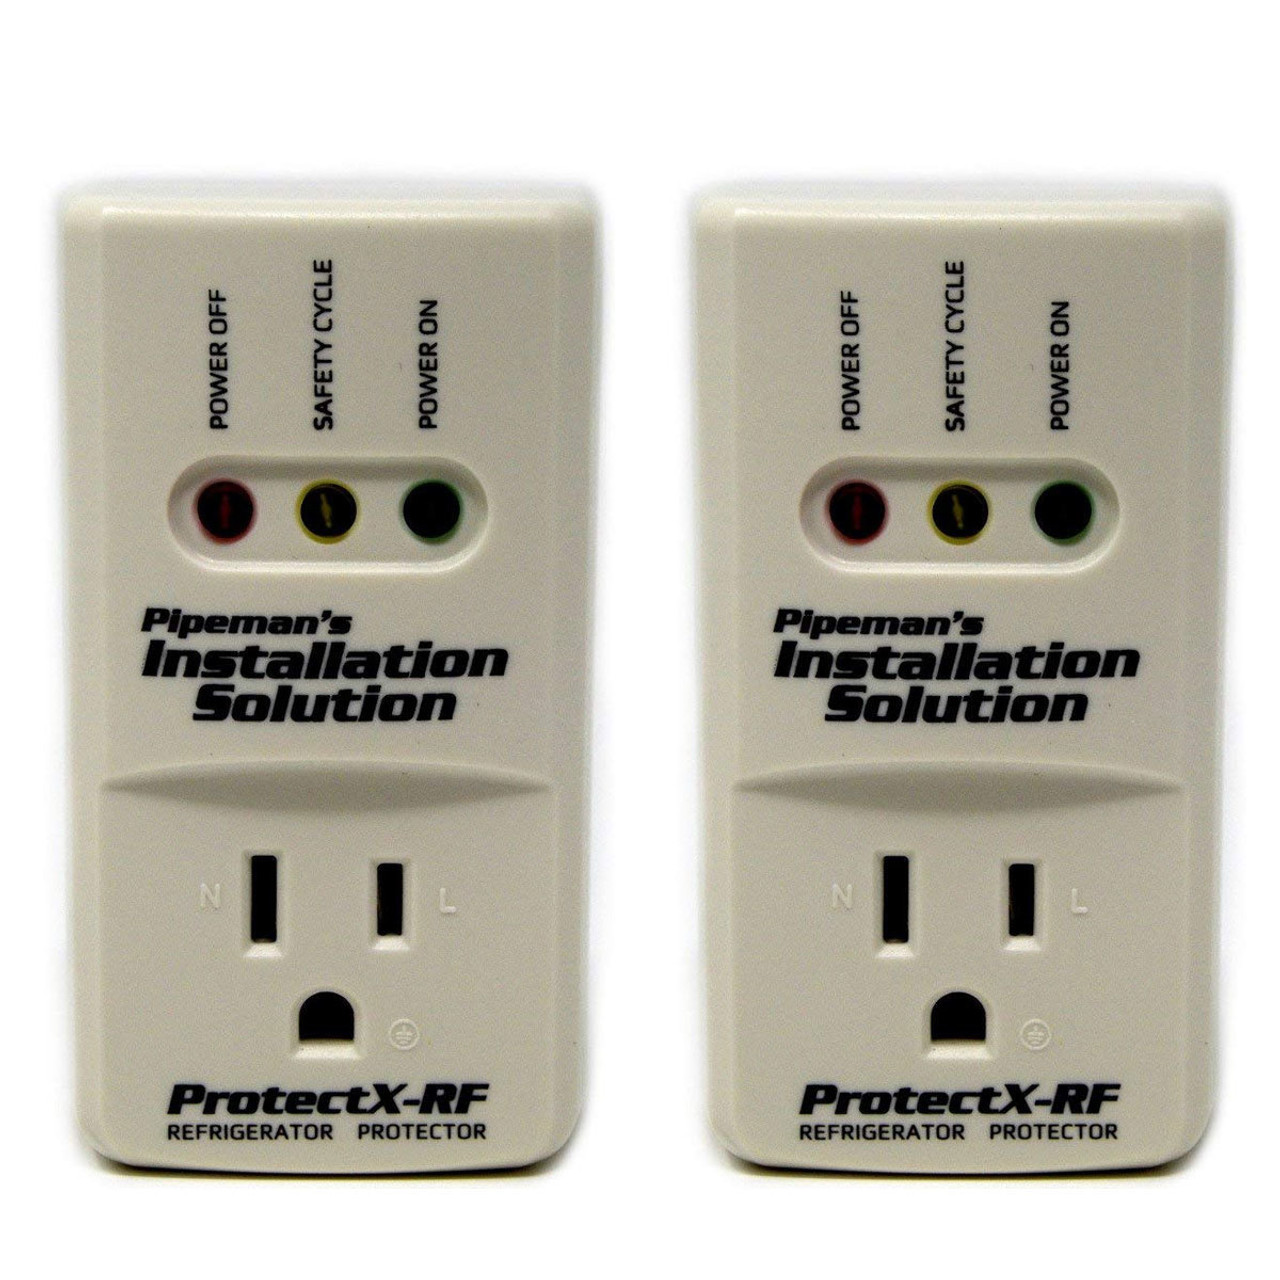 2-Pack 1800 Watts Refrigerator Voltage Surge Protector Appliance